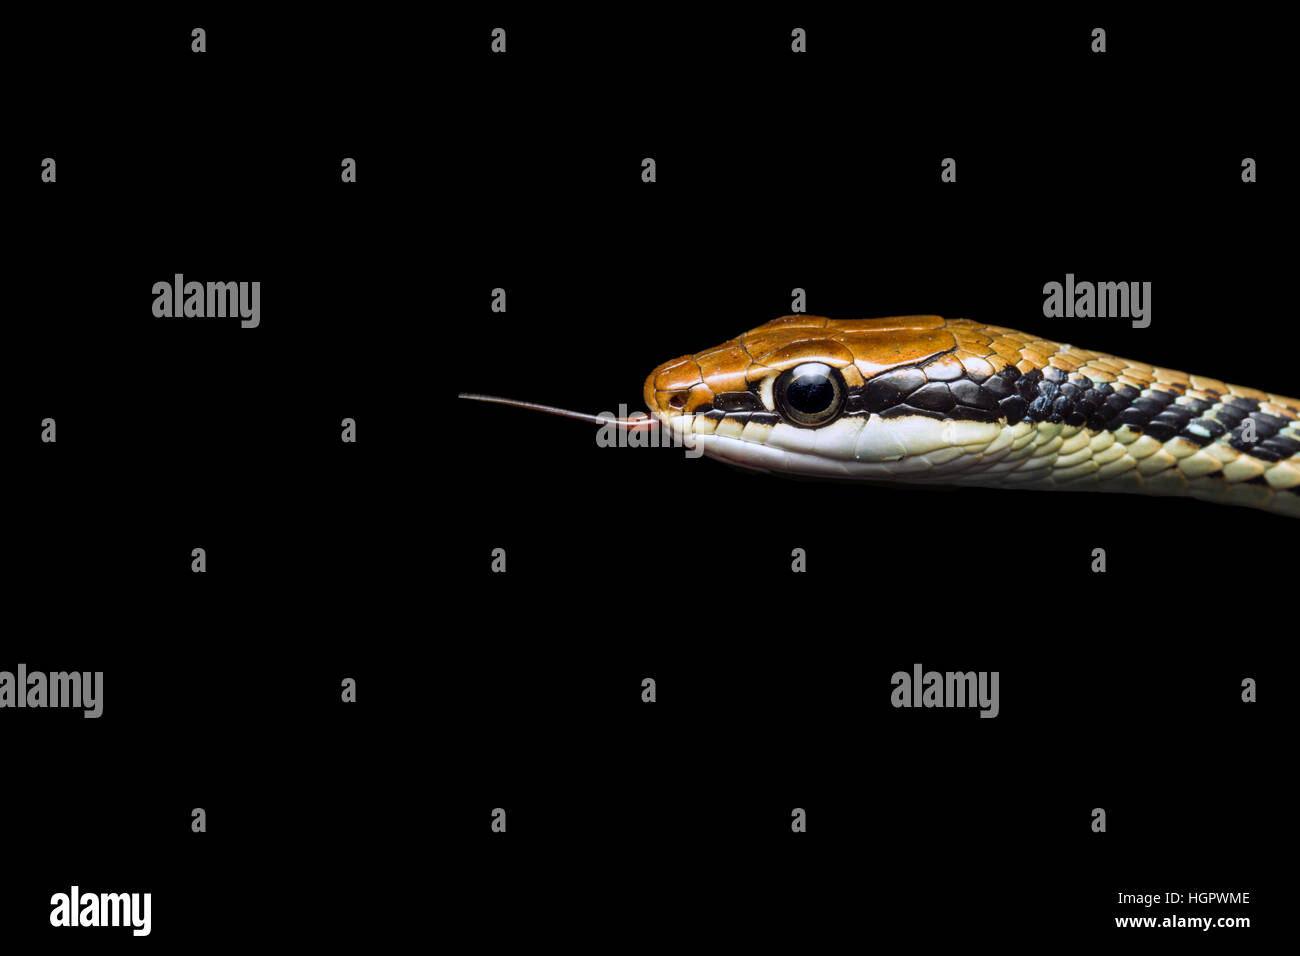 Painted Bronzeback Tree Snake (Dendrelaphis pictus) sampling air particles with forked tongue on edge of tropical rainforest in Malaysia Stock Photo